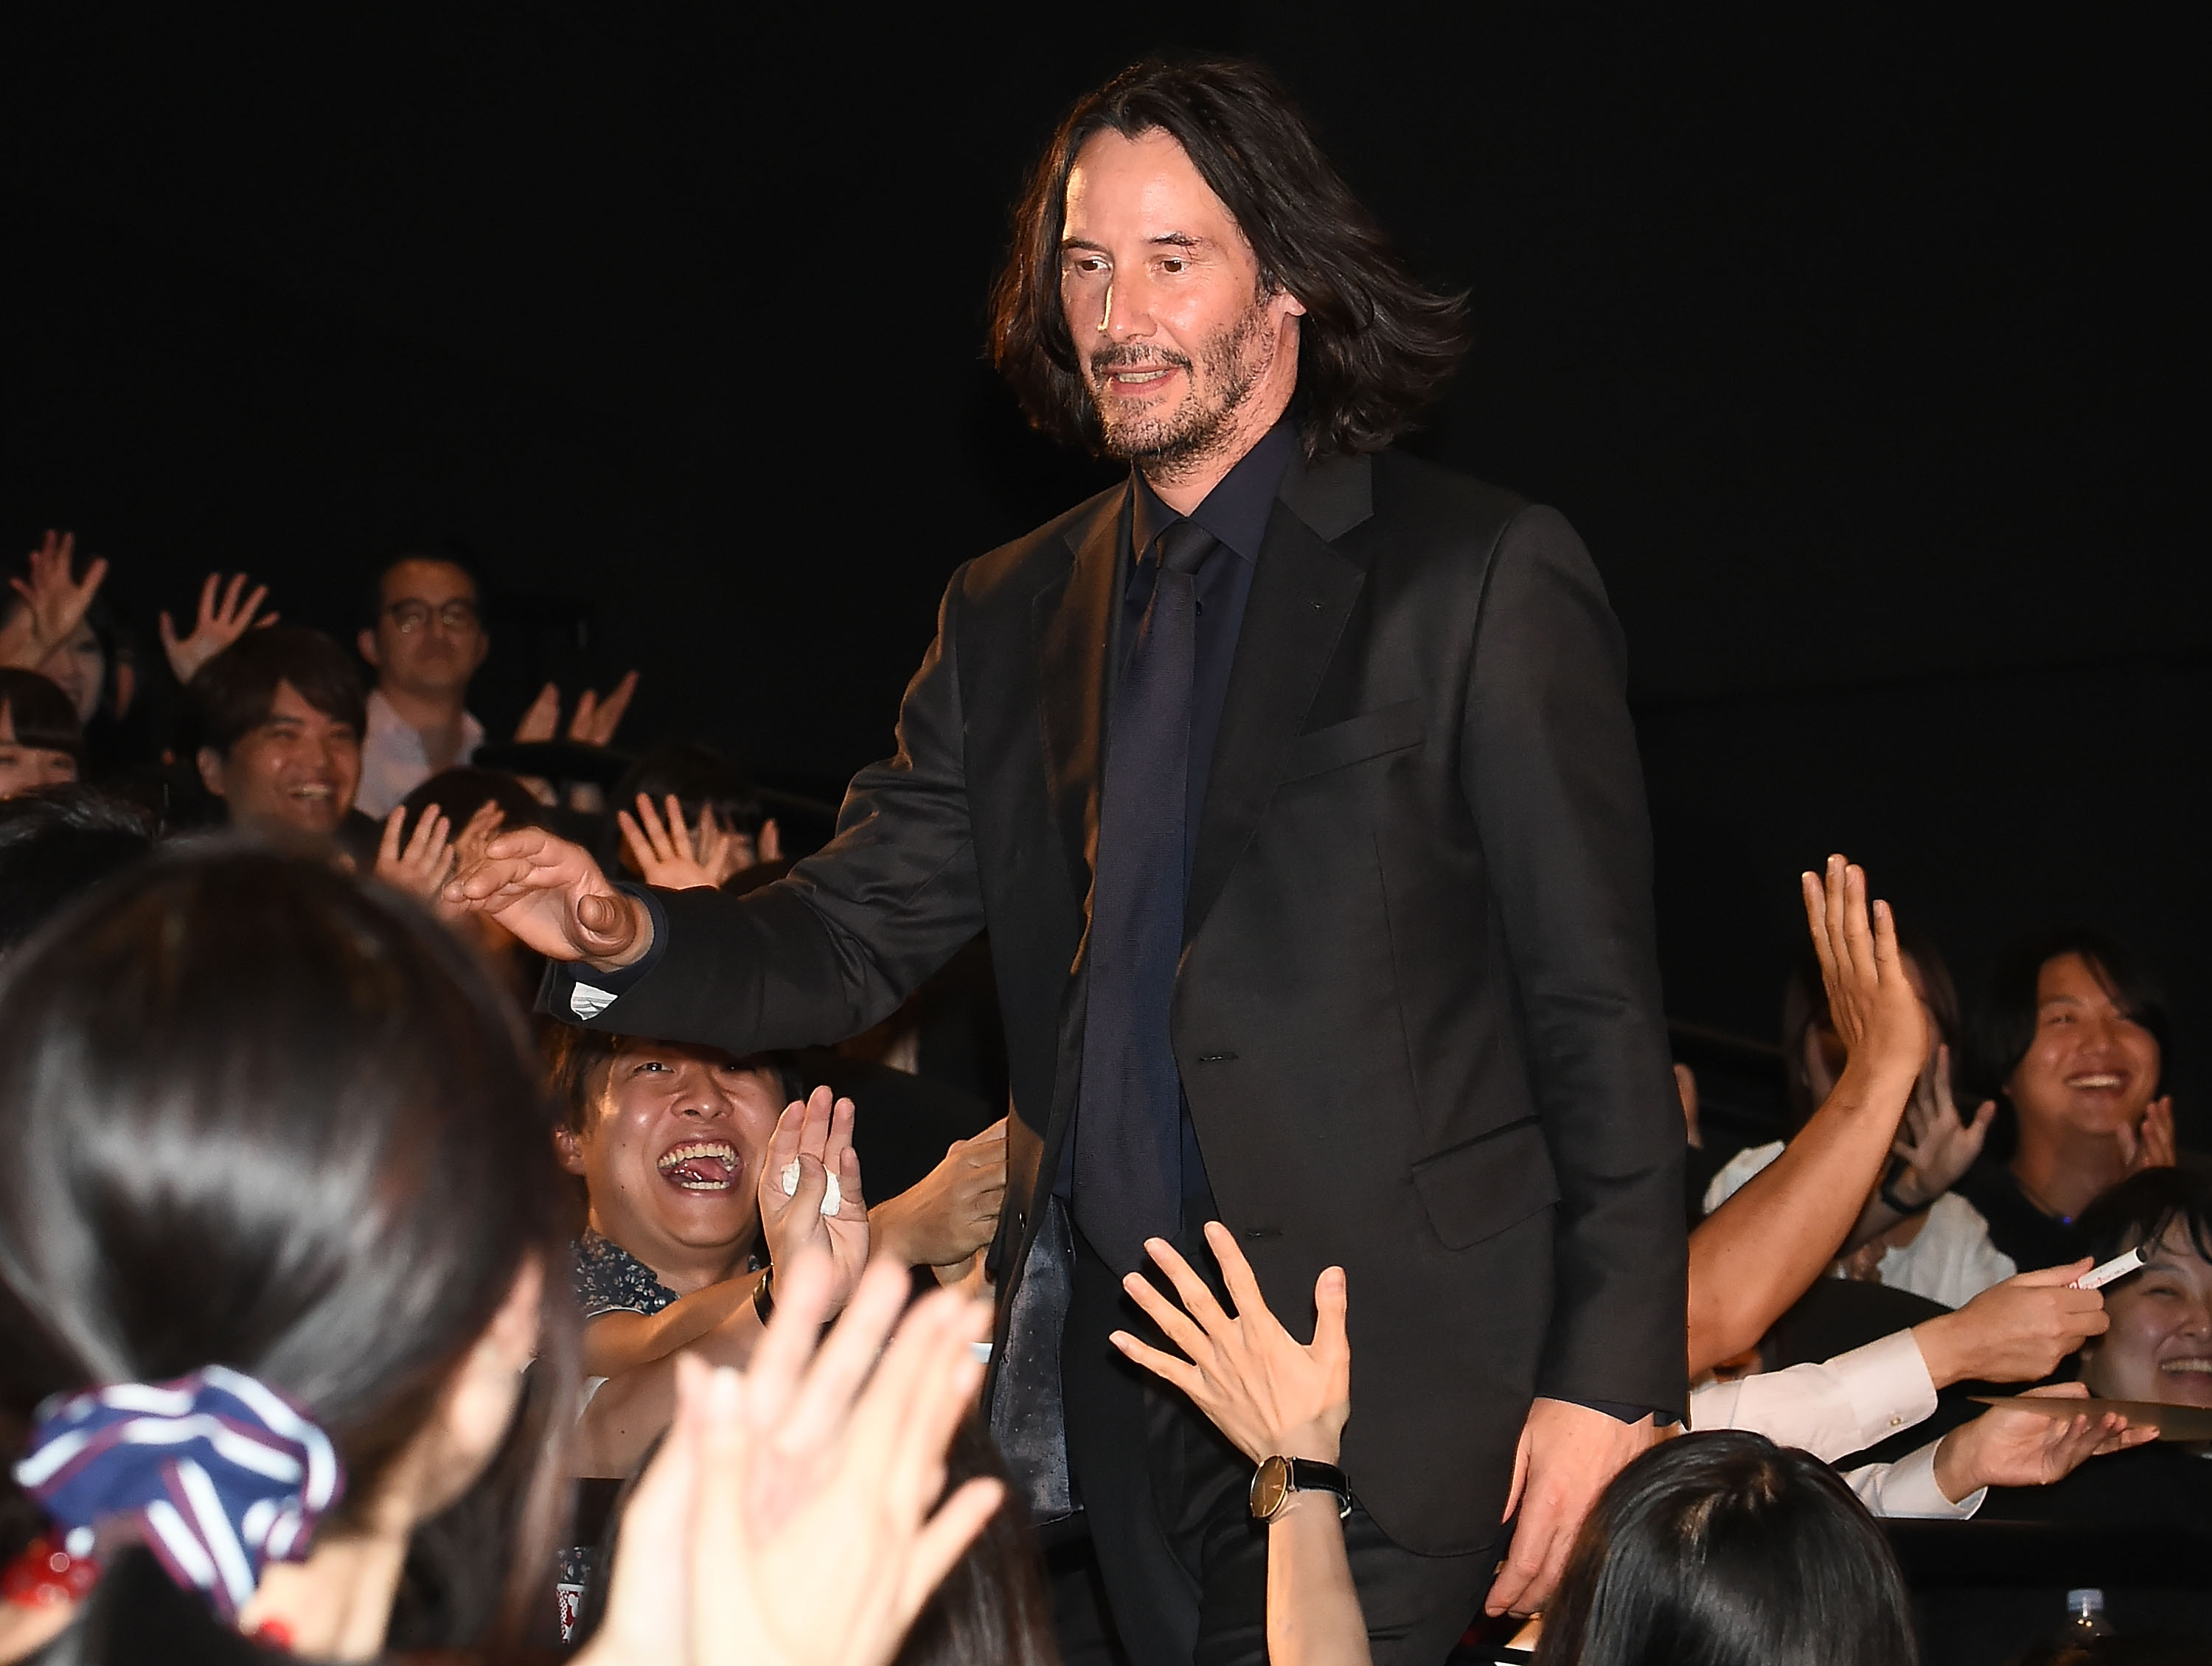 Keanu Reeves at the stage greeting for "John Wick: Chapter 3 - Parabellum" Japan premiere on September 10, 2019. | Source: Getty Images